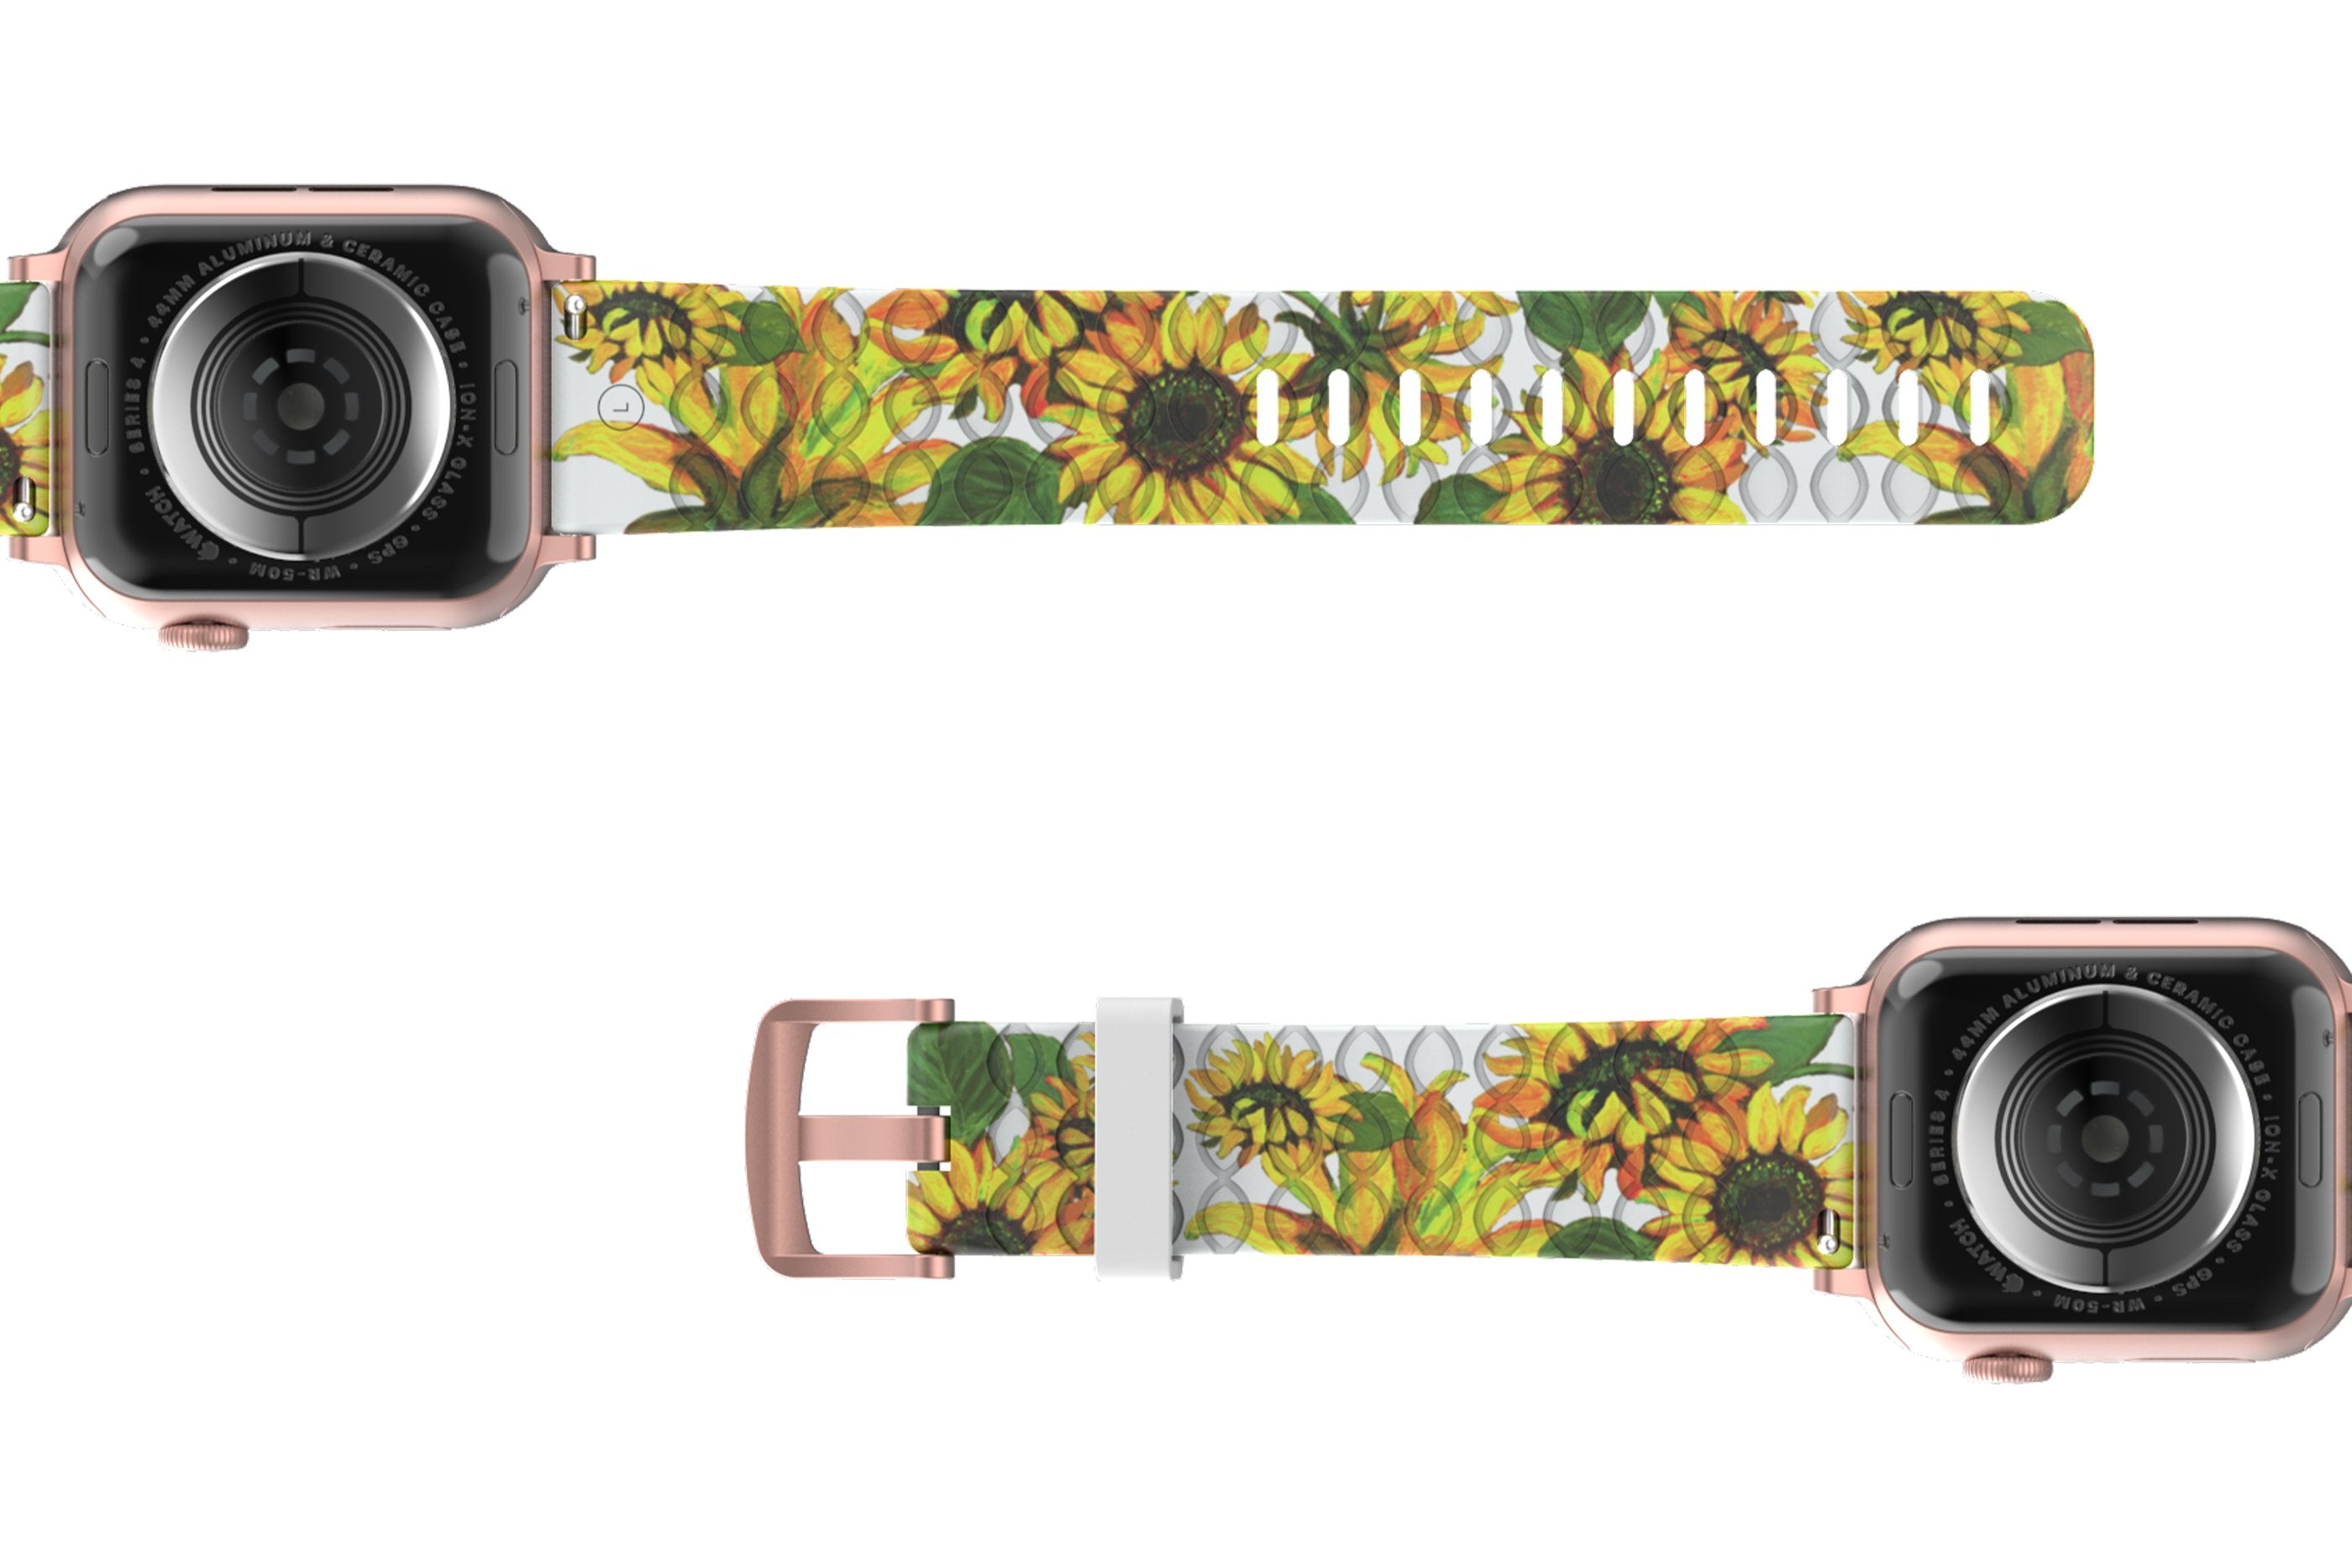 Sunflower Apple Watch Band with rose gold hardware viewed bottom up